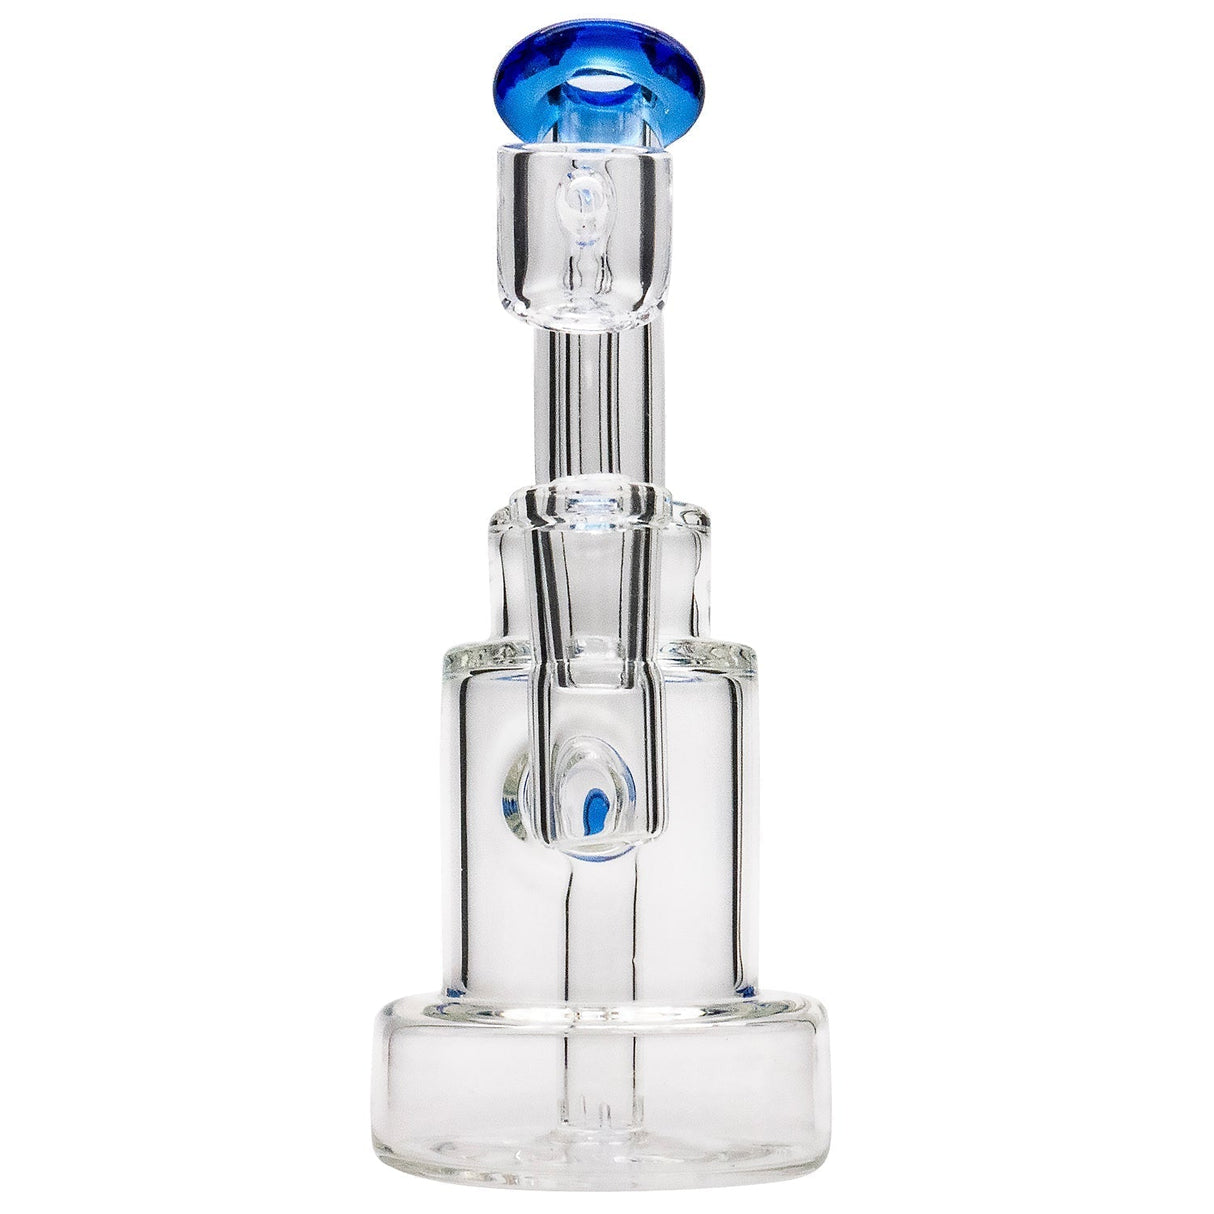 Glassic Stacked-Cake Dab Rig with Blue Accents, 90 Degree Joint, Front View on White